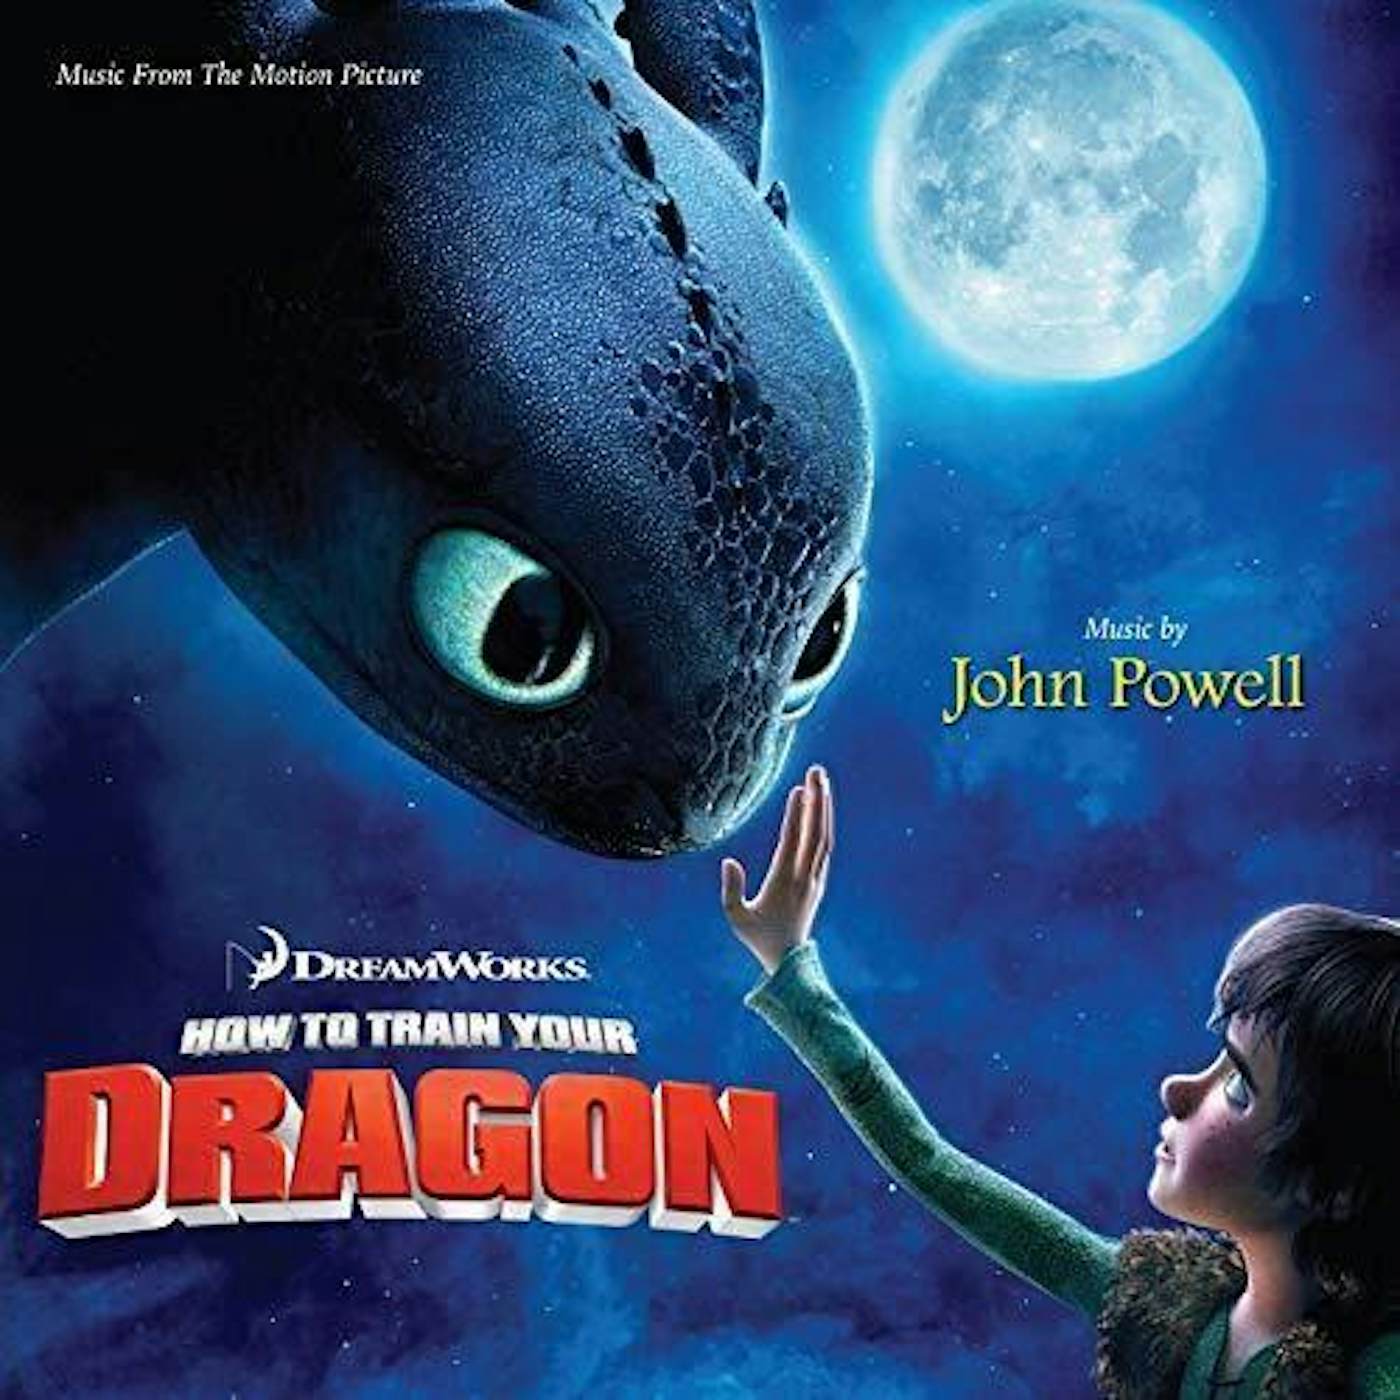 John Powell HOW TO TRAIN YOUR DRAGON / Original Soundtrack Vinyl Record (Picture Disc)